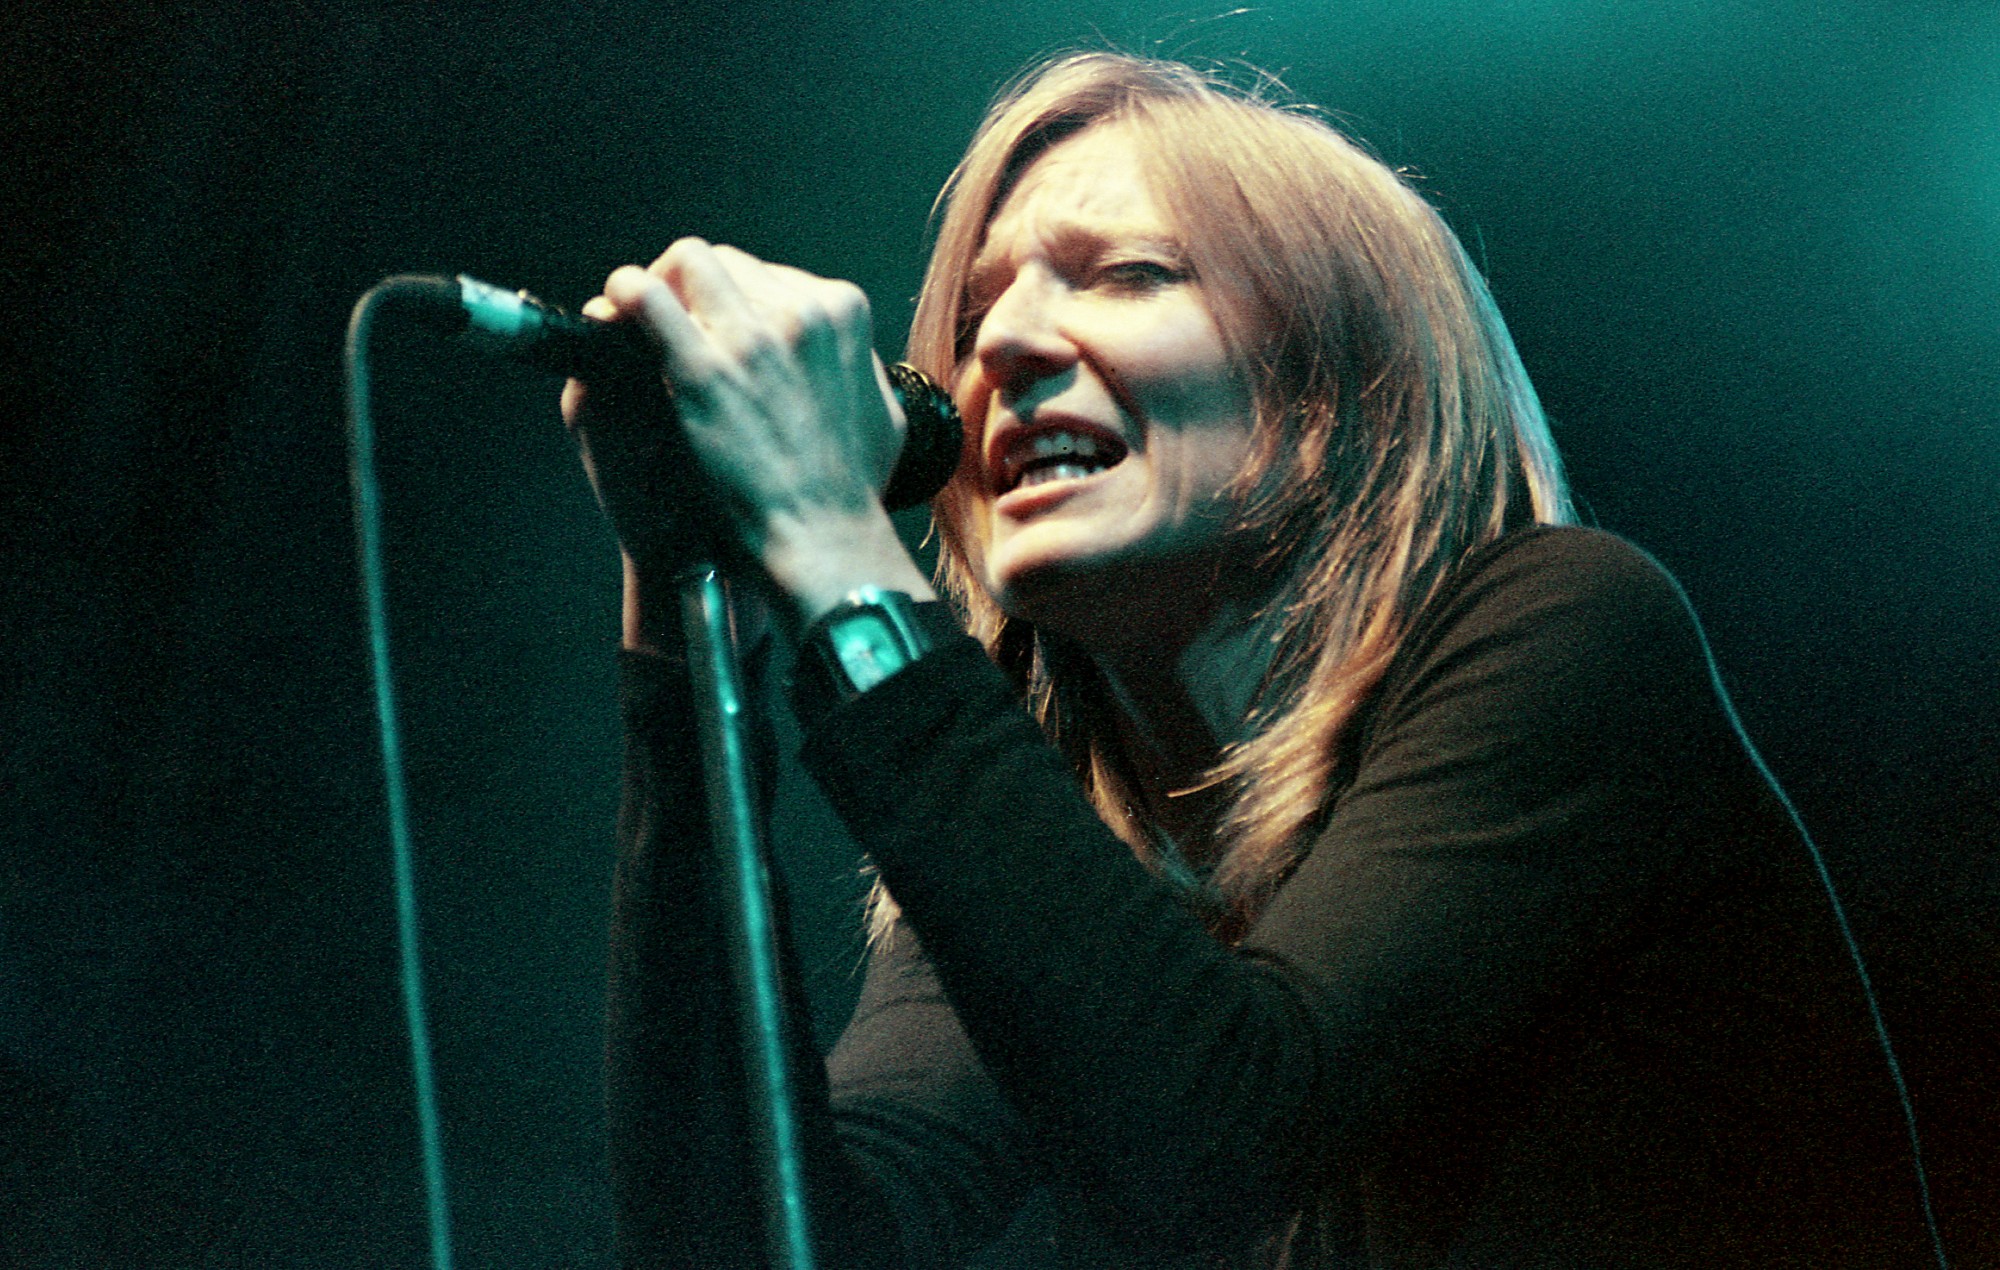 Portishead’s Beth Gibbons shares new solo track ‘Reaching Out’